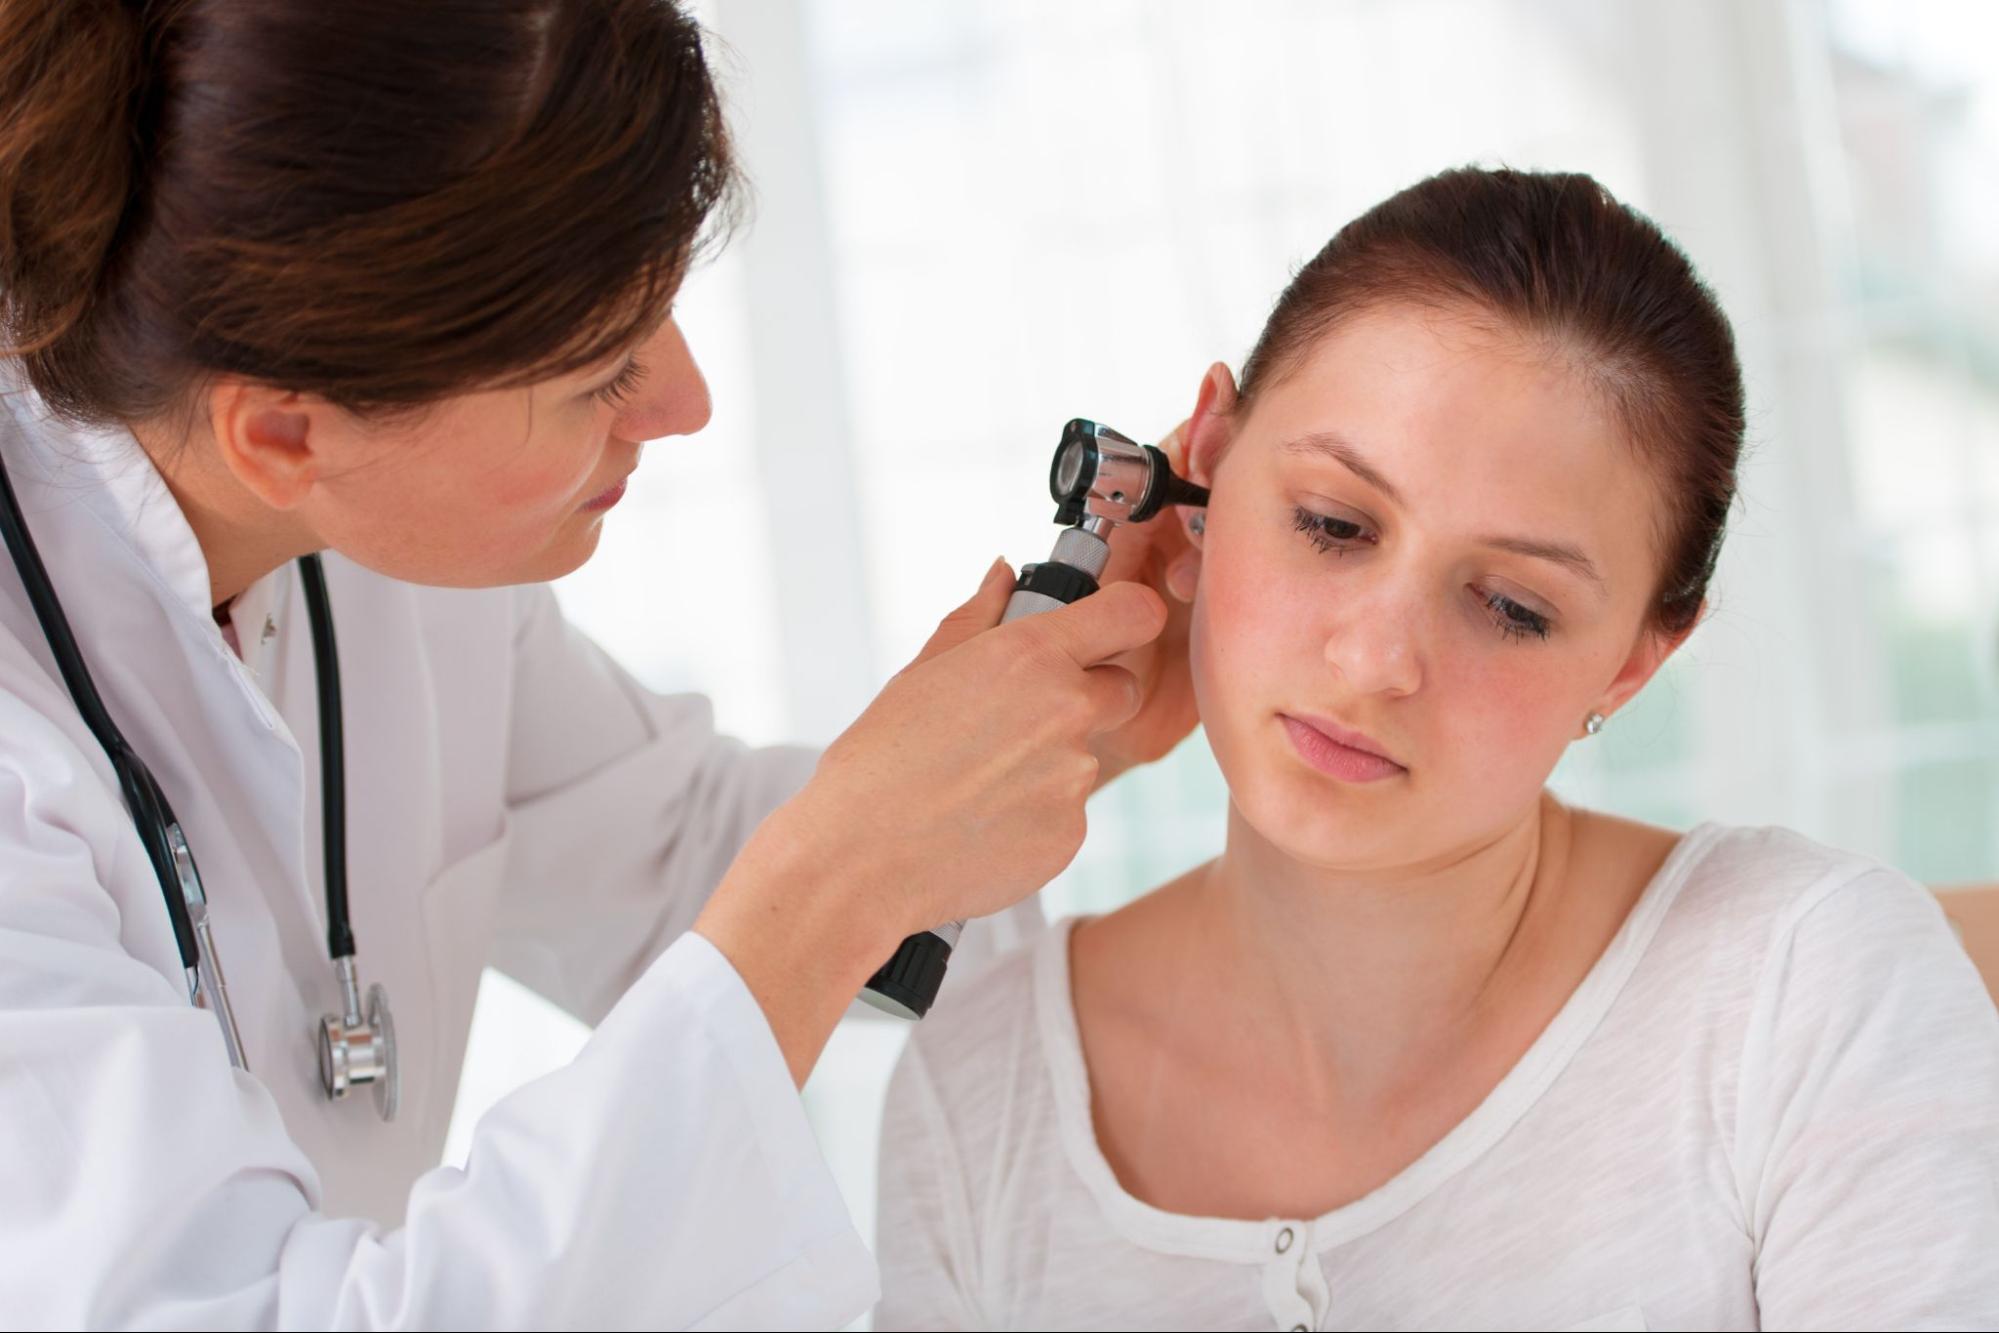 thumping in ear: doctor checking her patients ear